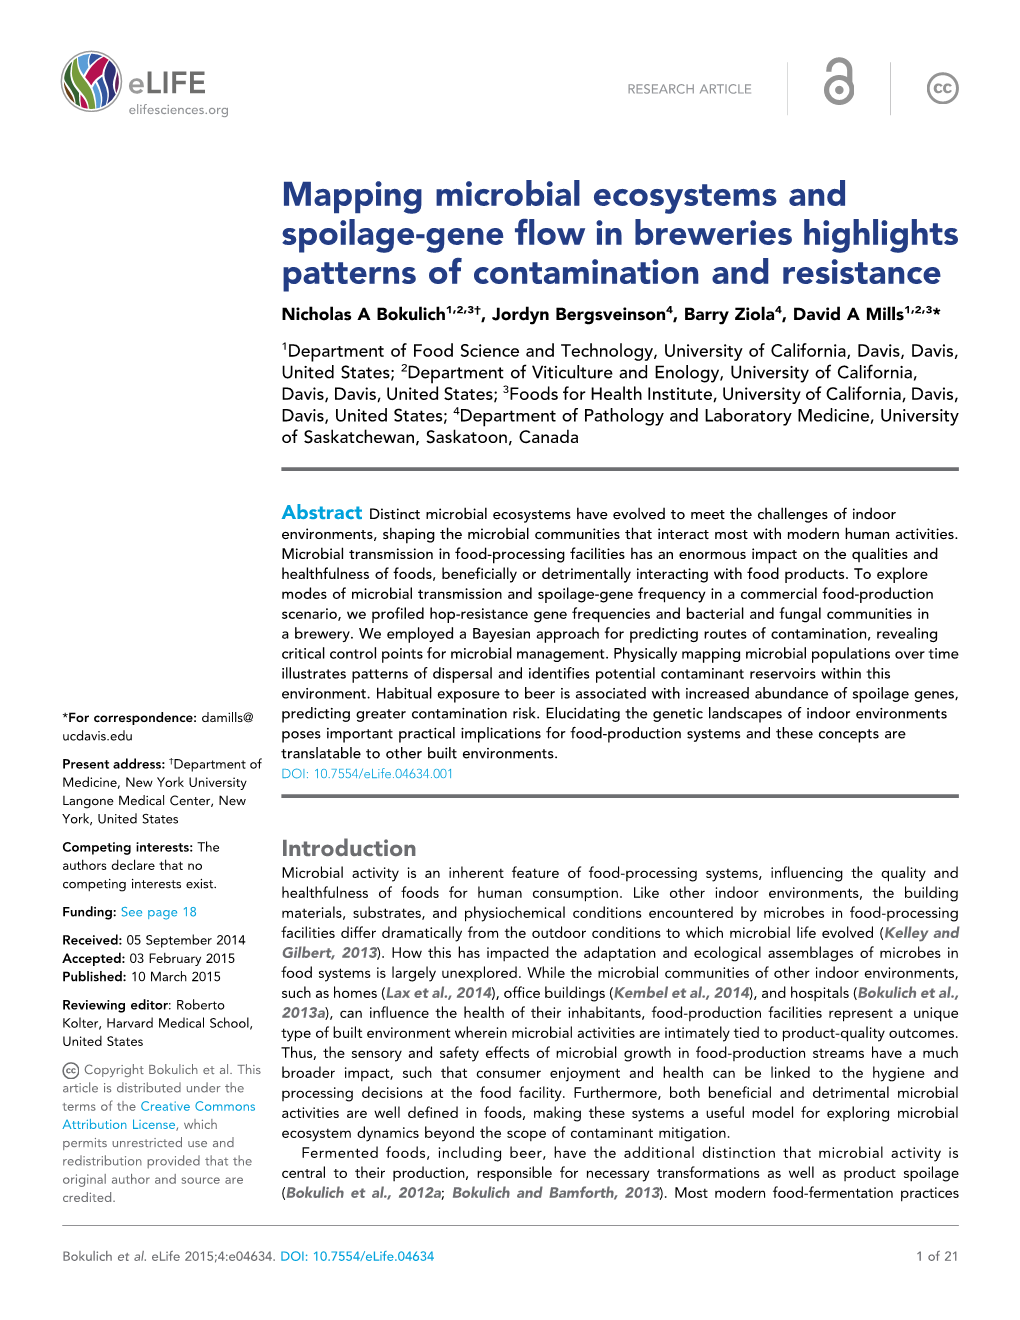 Mapping Microbial Ecosystems and Spoilage-Gene Flow in Breweries